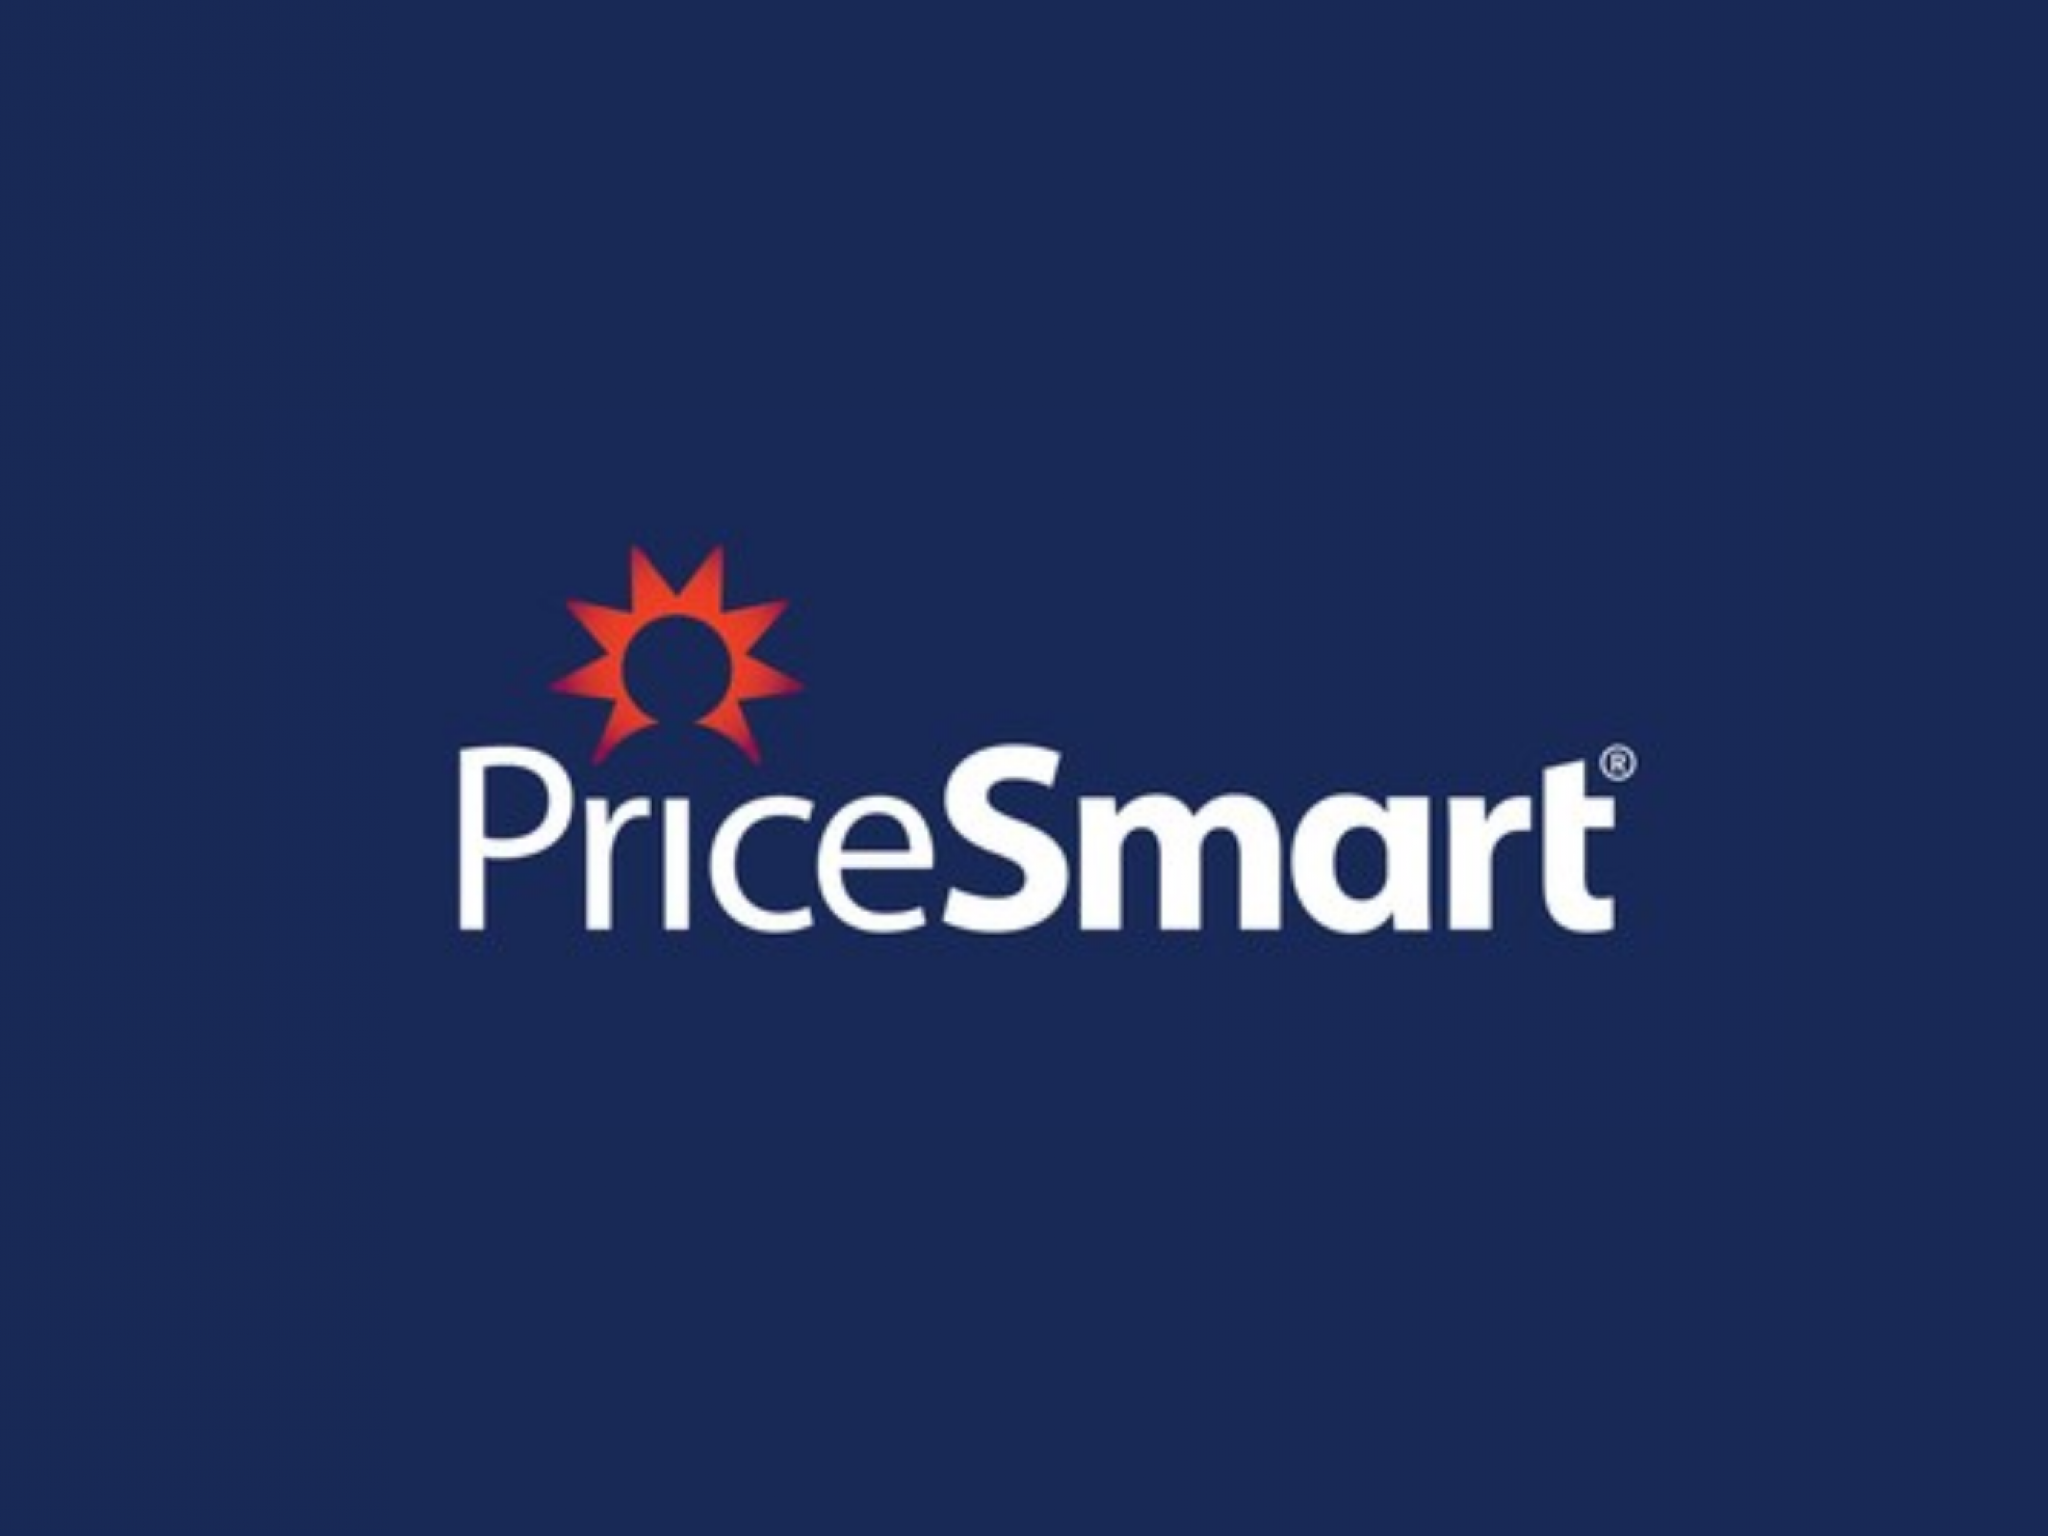  why-shopping-warehouse-clubs-operator-pricesmart-shares-are-rising-today 